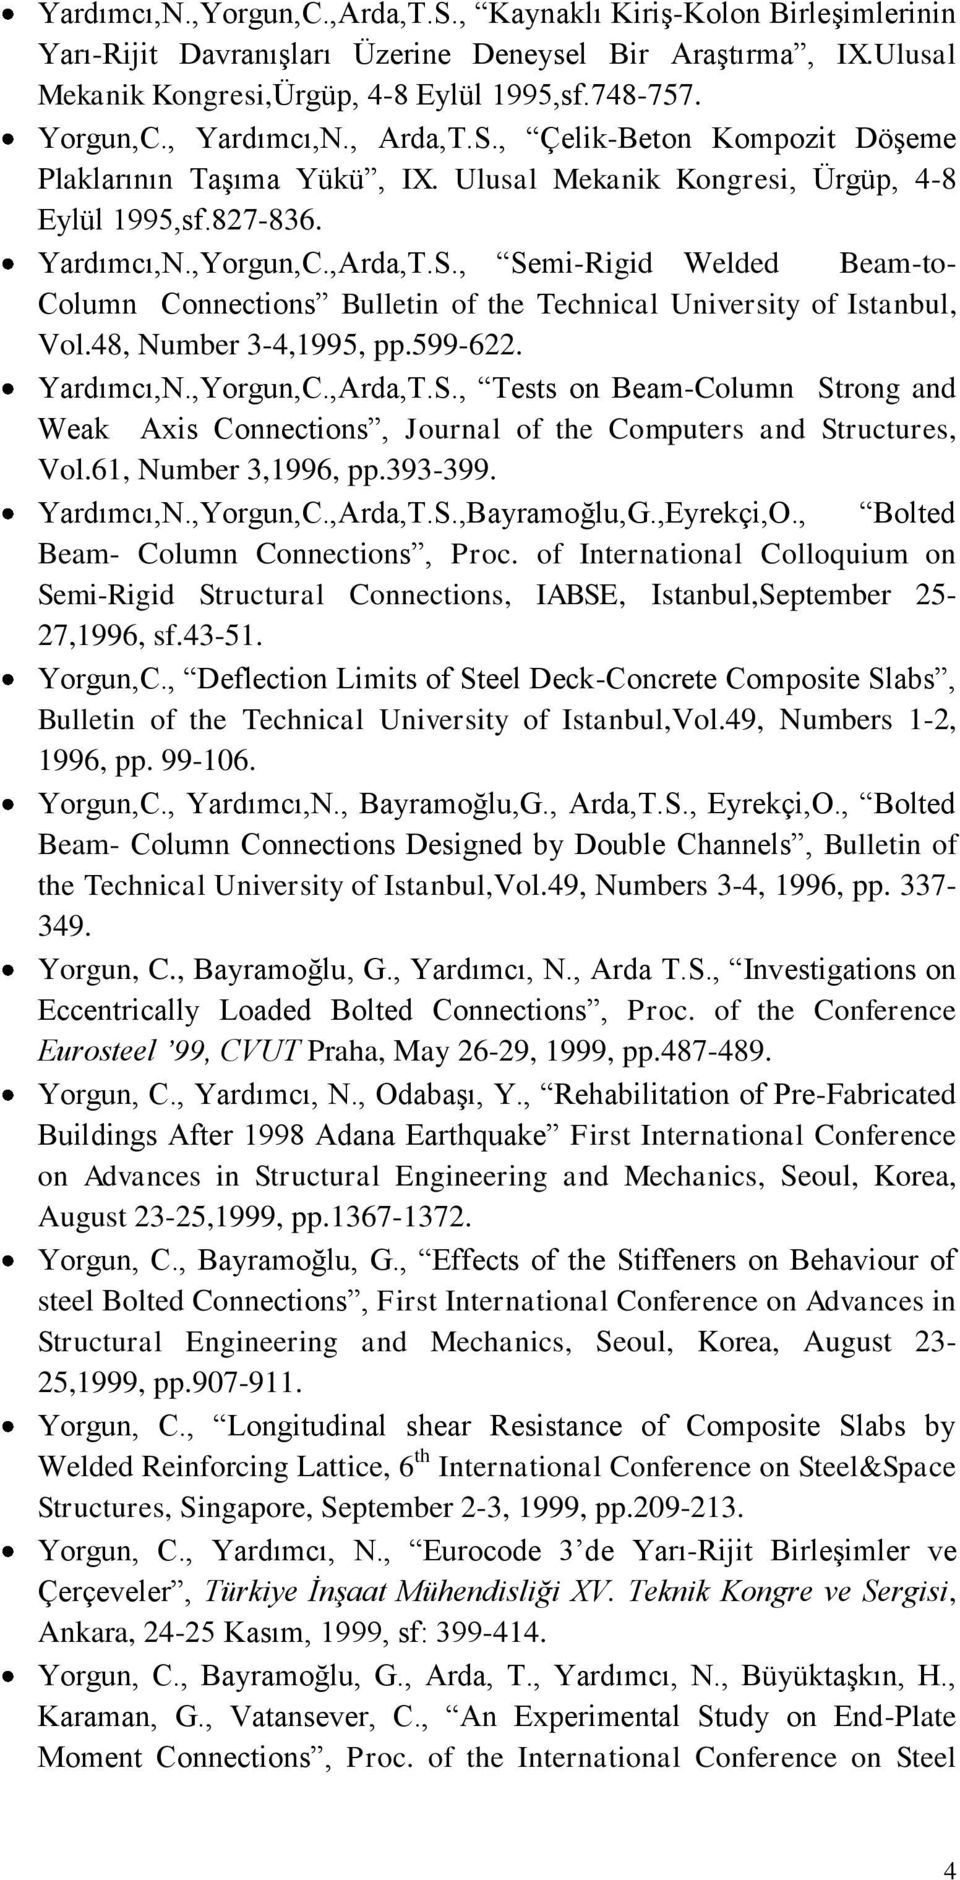 48, Number 3-4,1995, pp.599-622. Yardımcı,N.,Yorgun,C.,Arda,T.S., Tests on Beam-Column Strong and Weak Axis Connections, Journal of the Computers and Structures, Vol.61, Number 3,1996, pp.393-399.